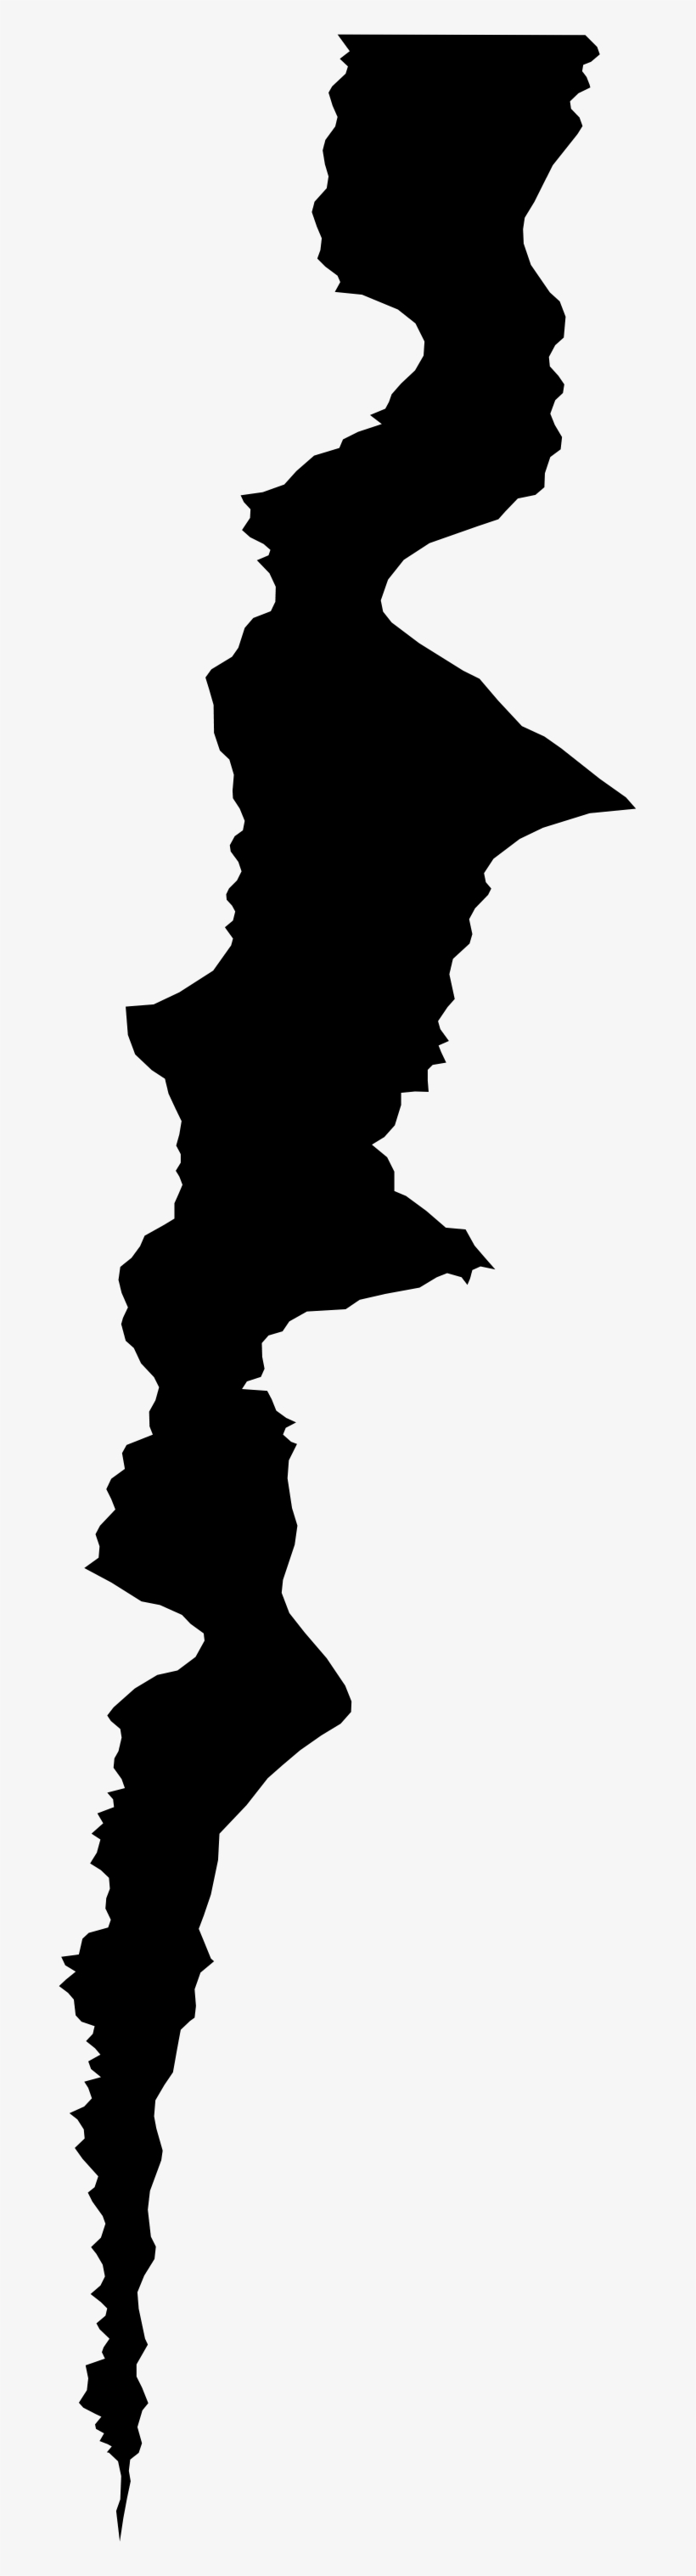 Crack Silhouette At Getdrawings - Crack Silhouette, transparent png #369486